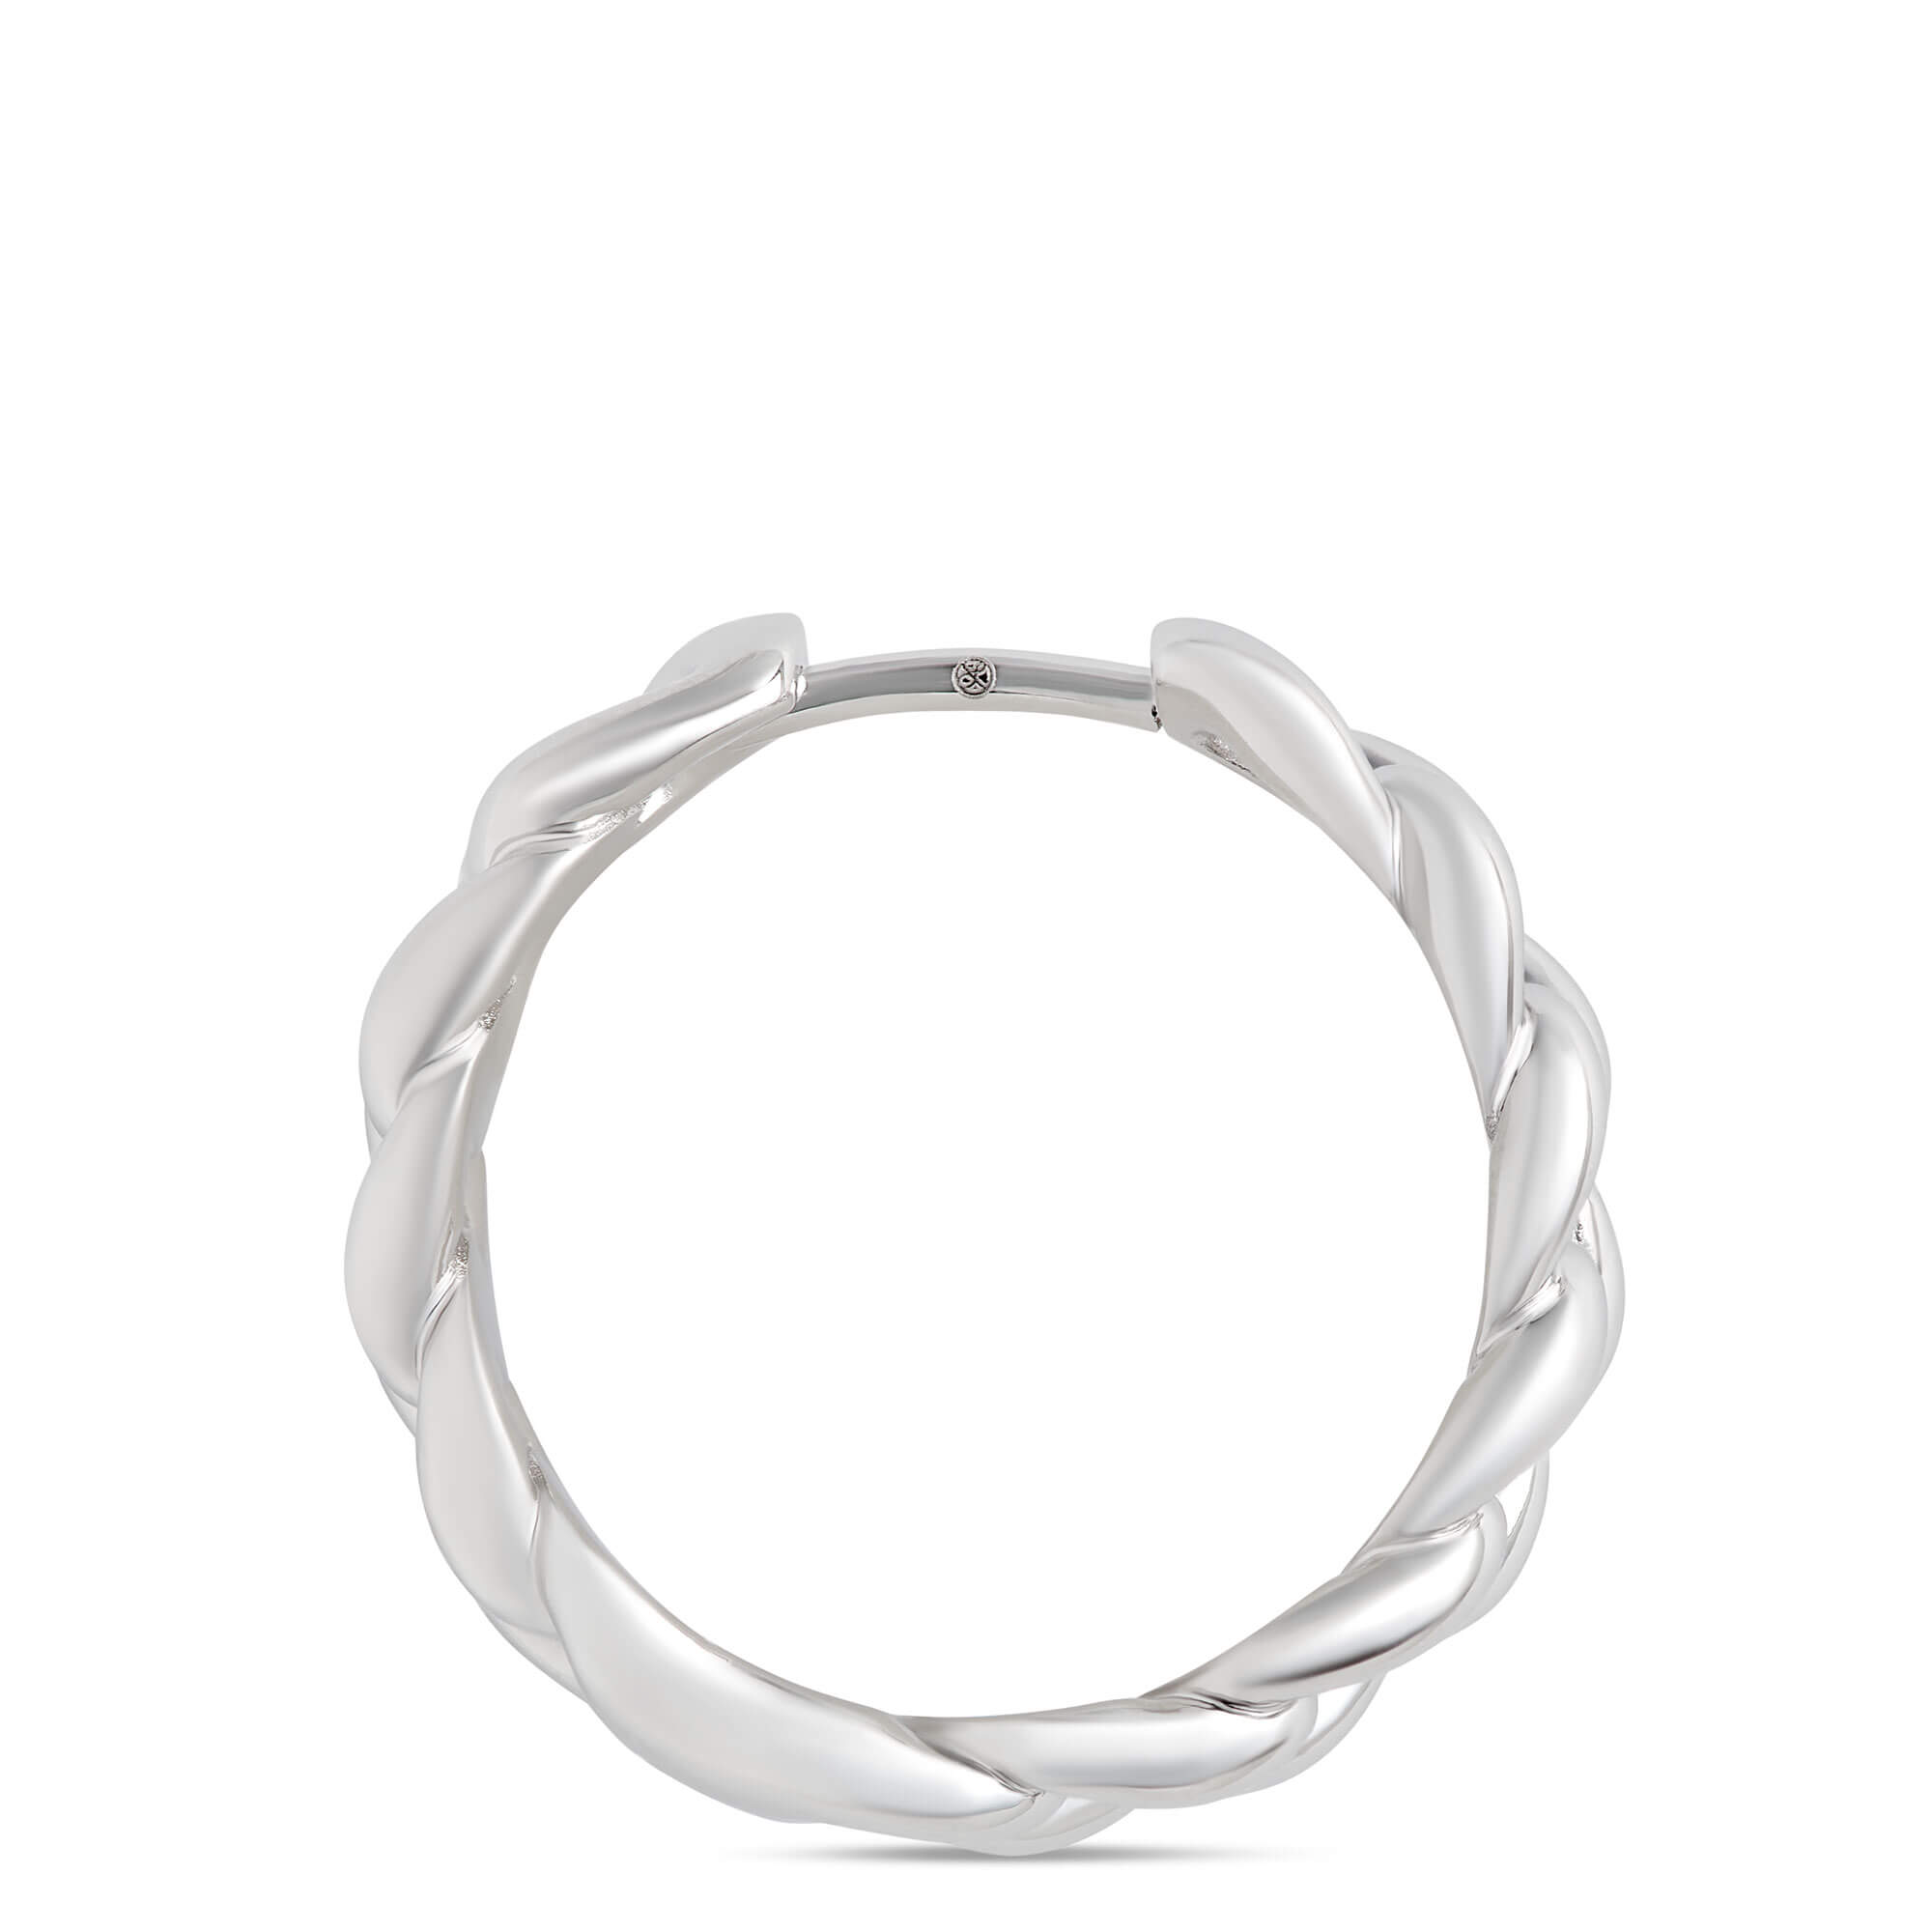 Silver Chain Ring Silver Stainless Steel Twisted Chained Ring Mens